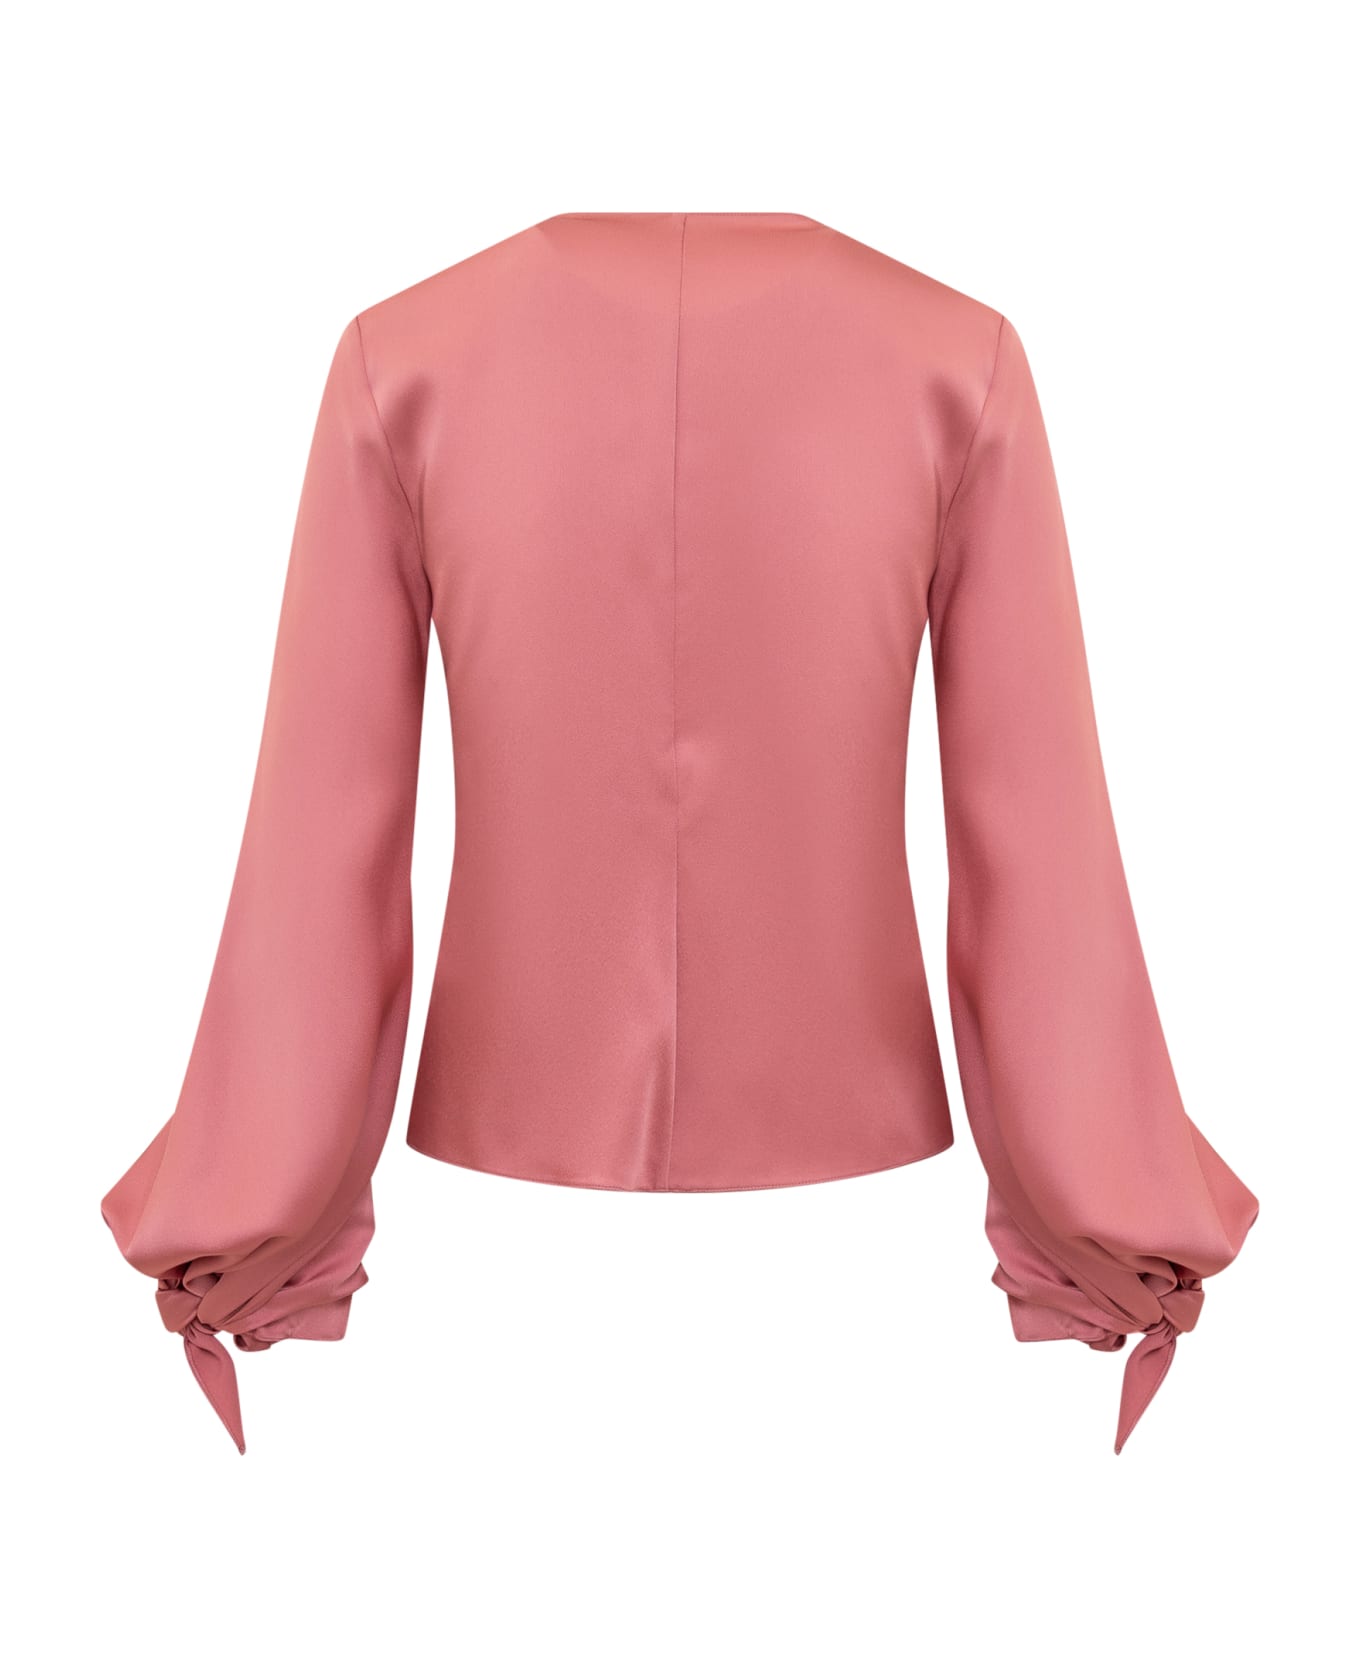 Del Core Blouse With Bow - ANTIQUE ROSE